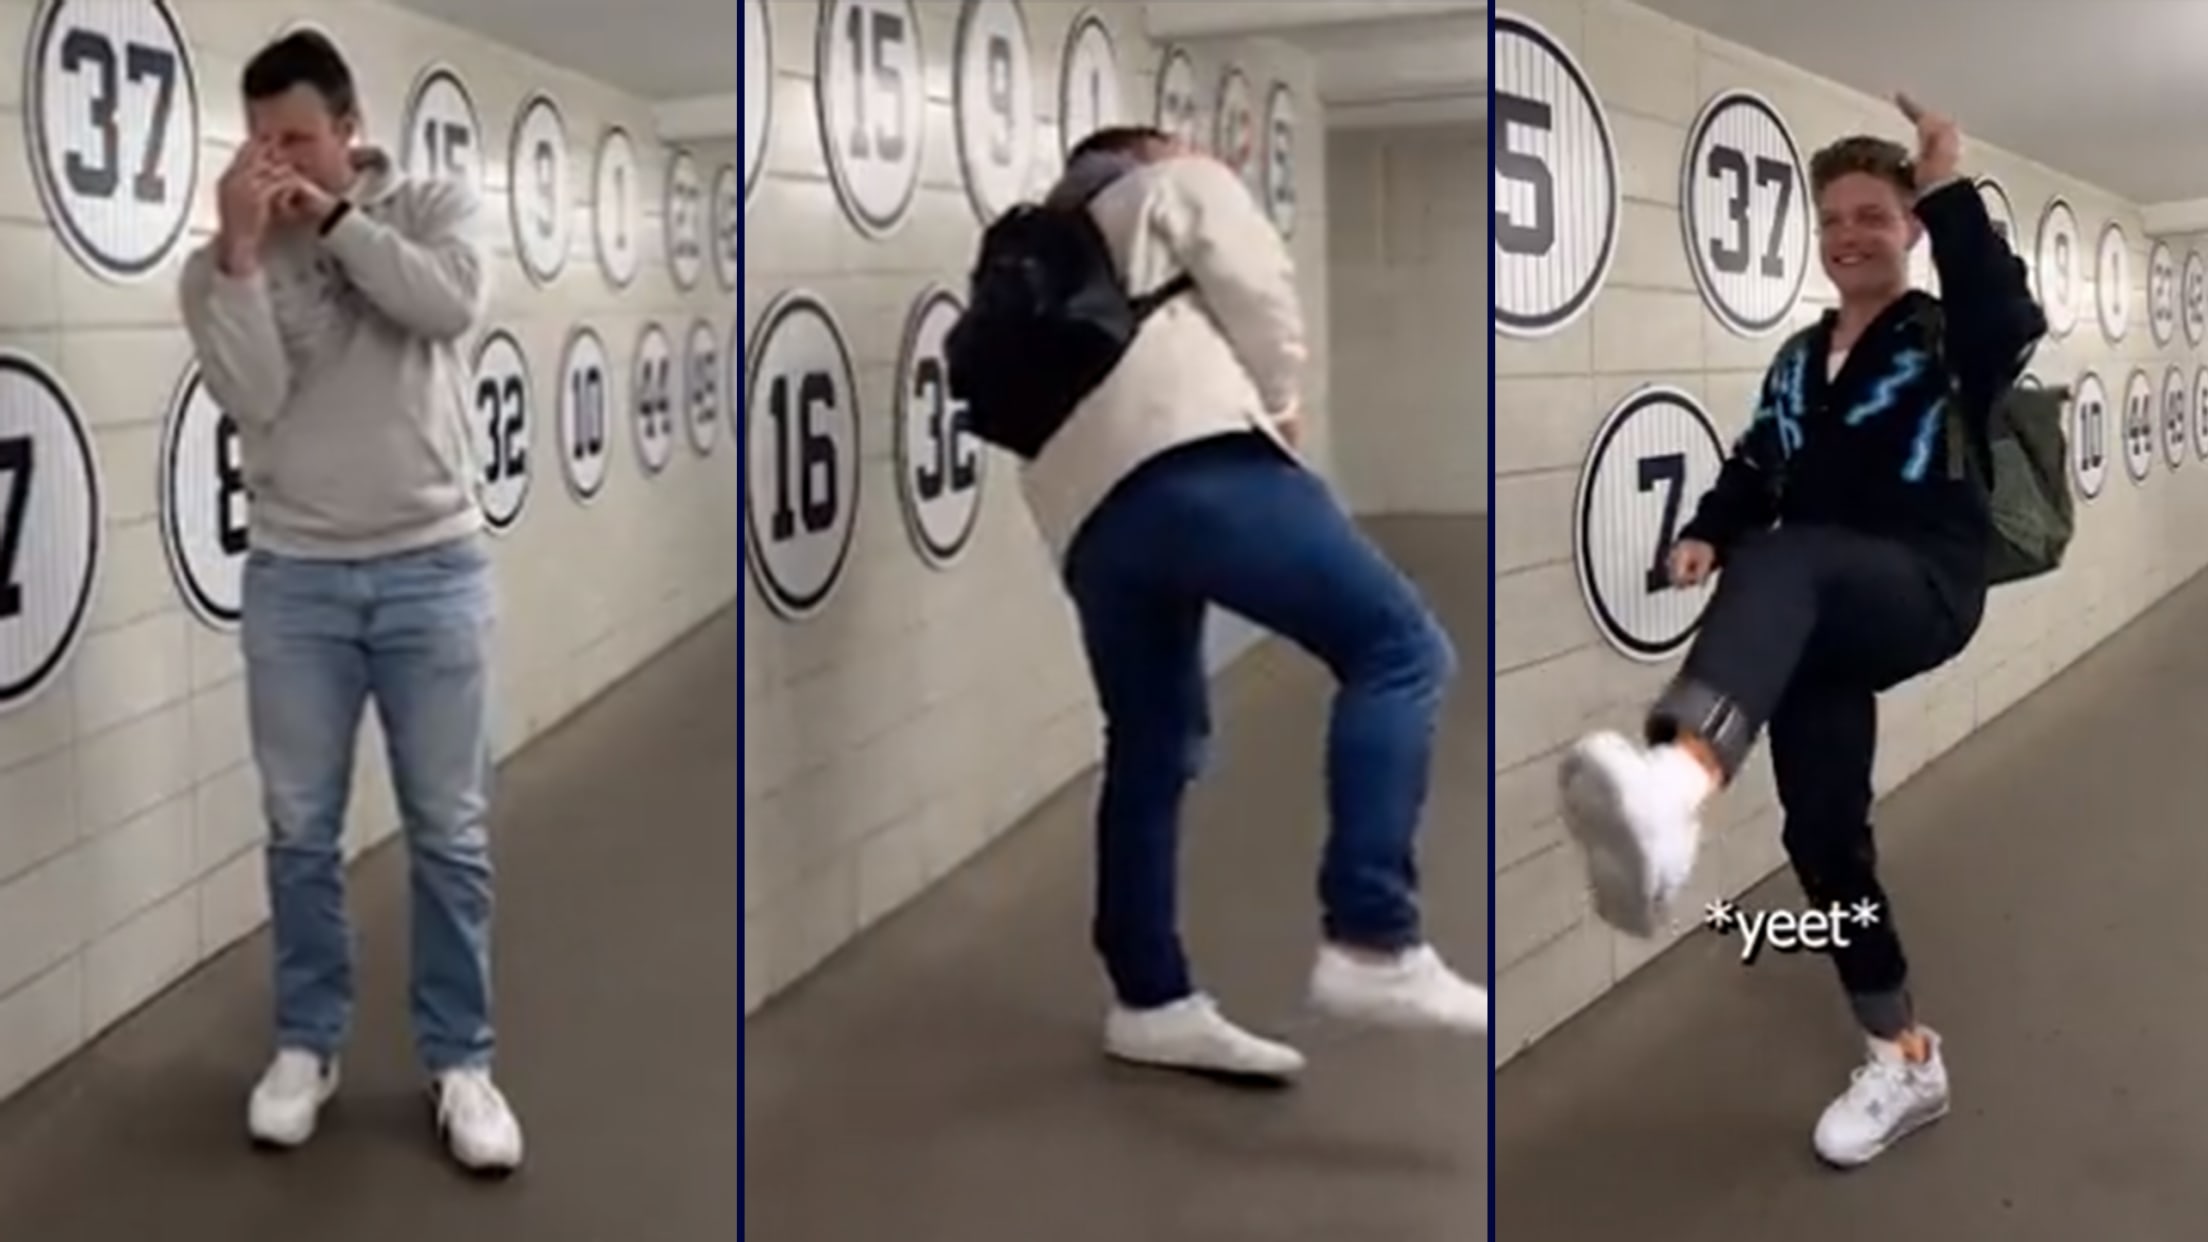 A composite of three screengrabs showing players in street clothes imitating Yankees pitcher Nestor Cortes